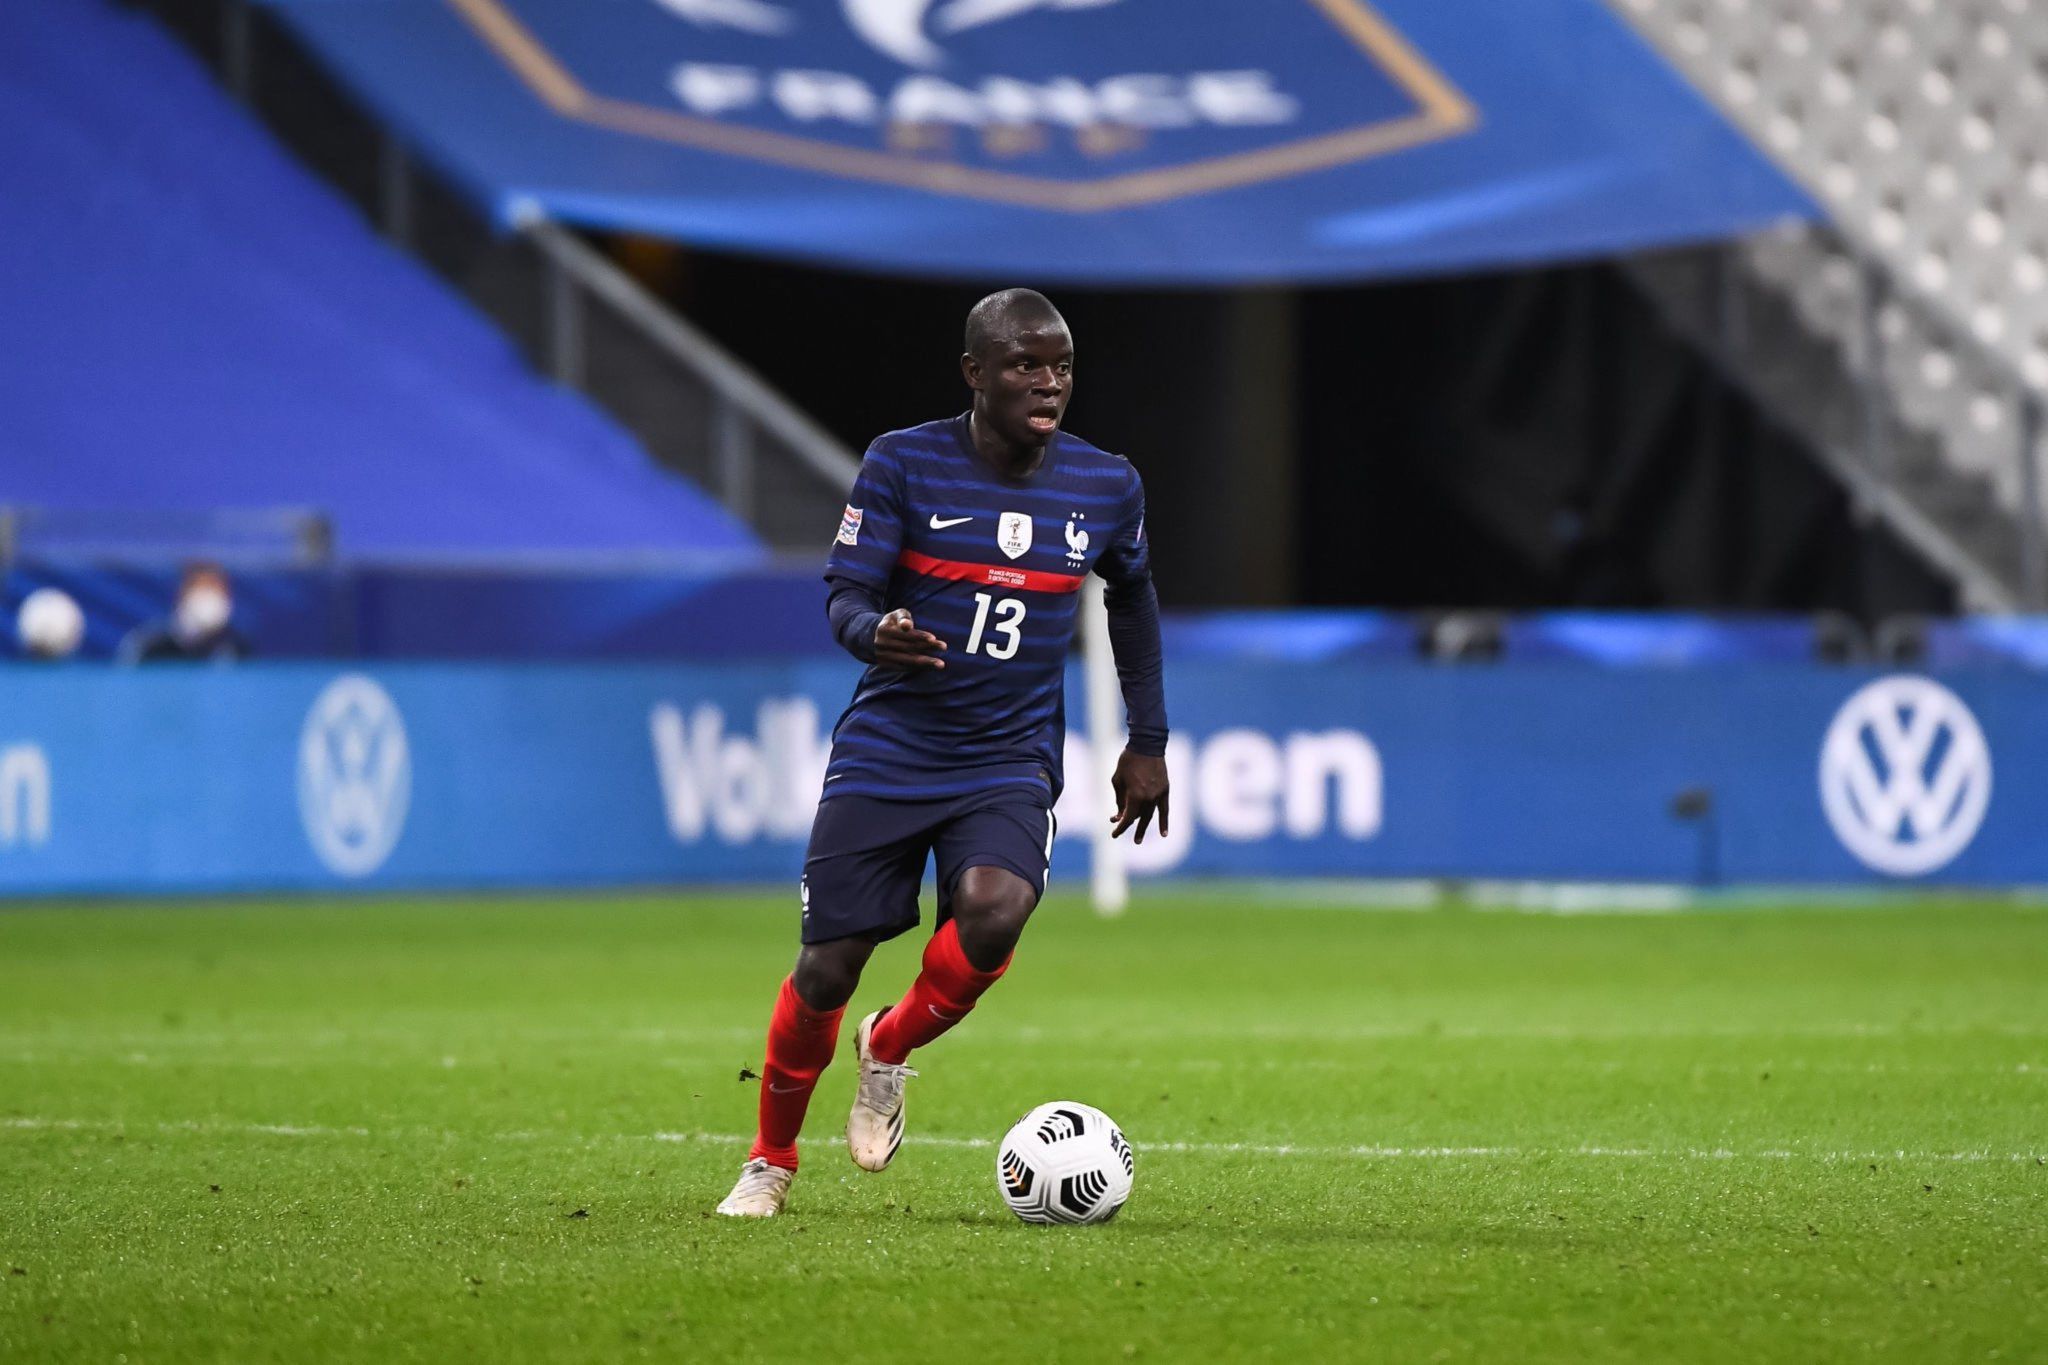 PSG will be looking at Kante next summer as they continue free agent frenzy » Chelsea News